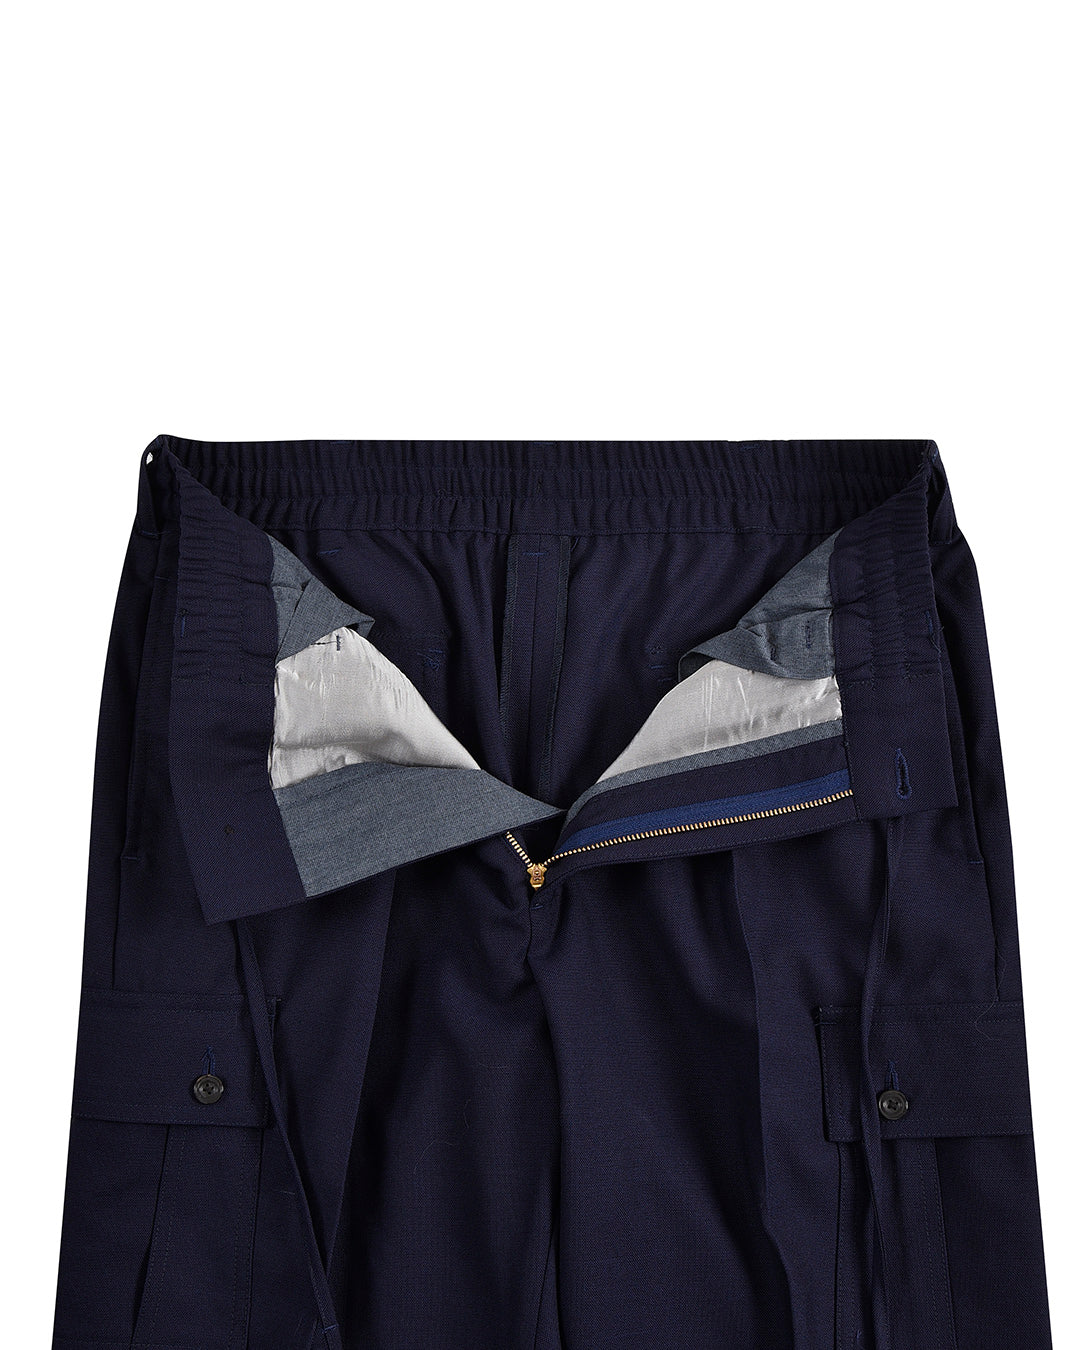 Front open view of custom cargo pants for men by Luxire in navy